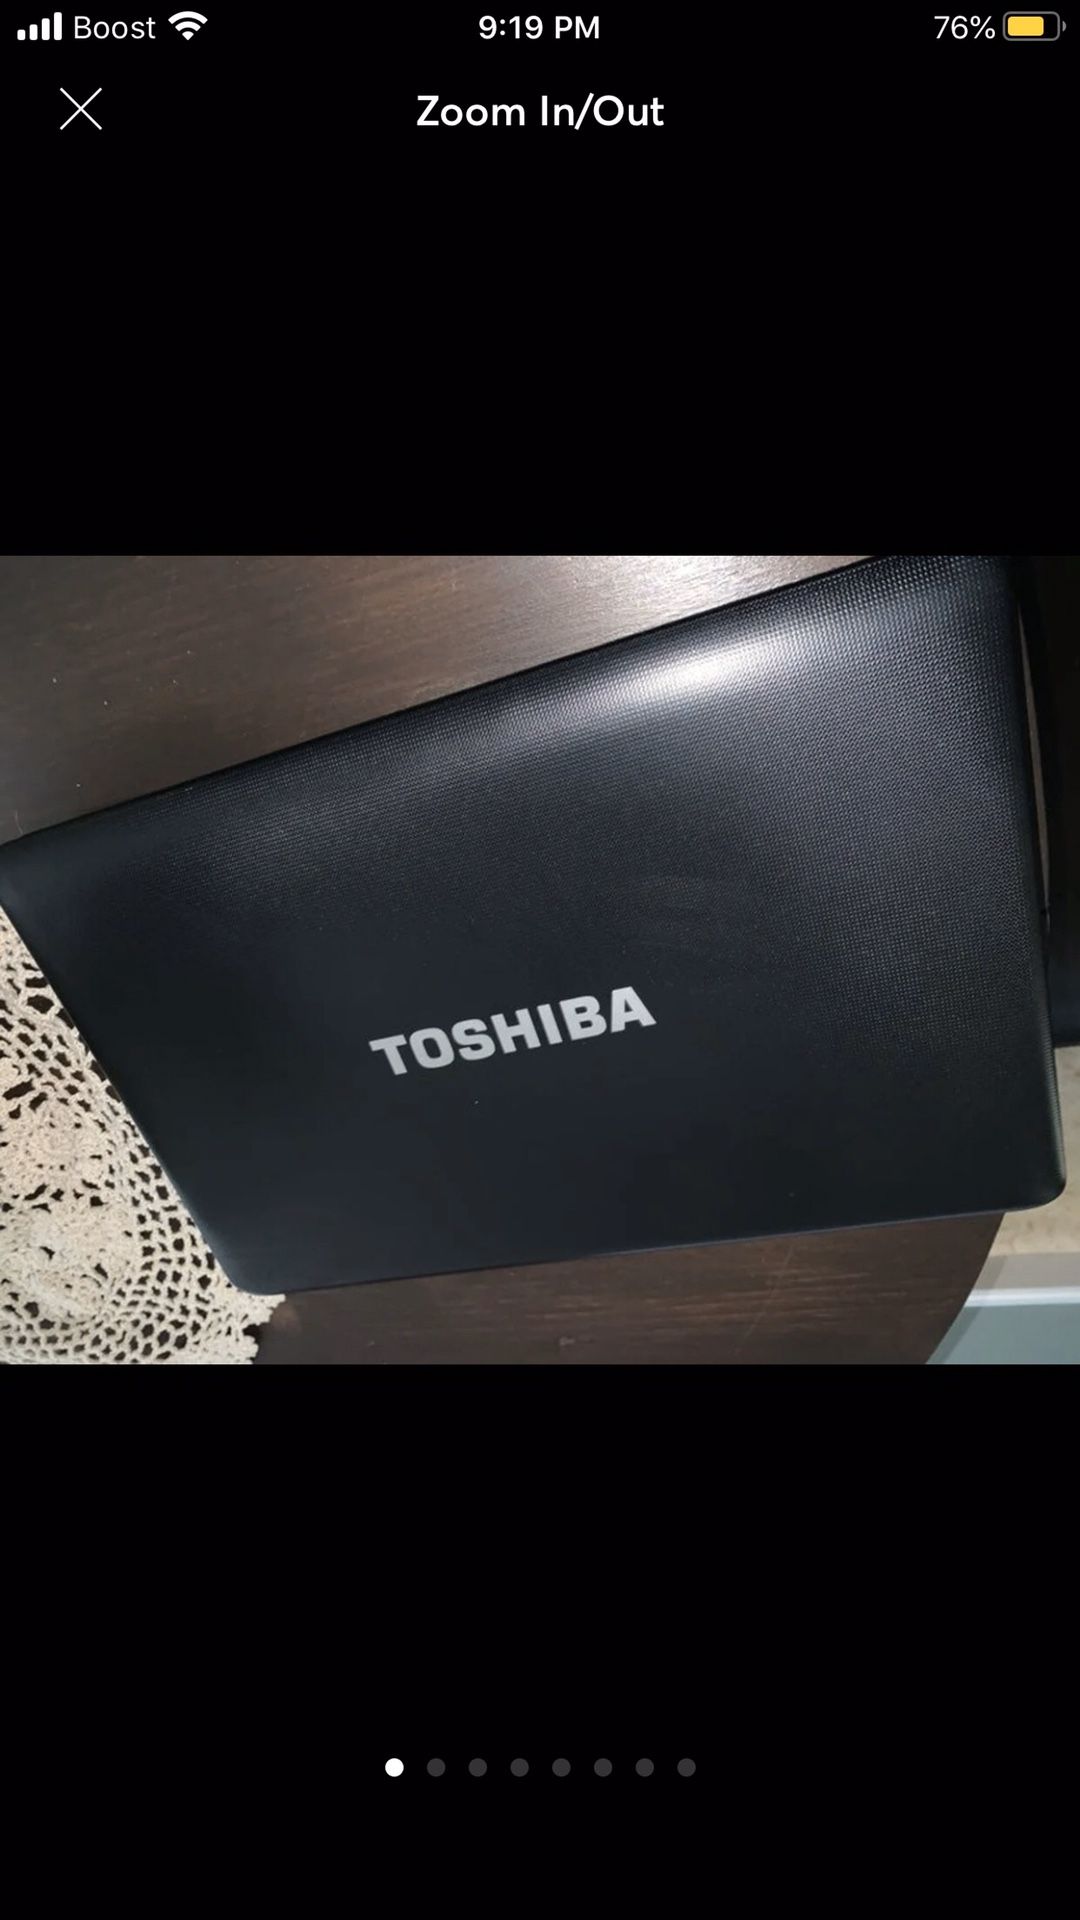 Toshiba satellite 500gb 4gb ram (touch screen) will trade for iPhone 8+ or newer